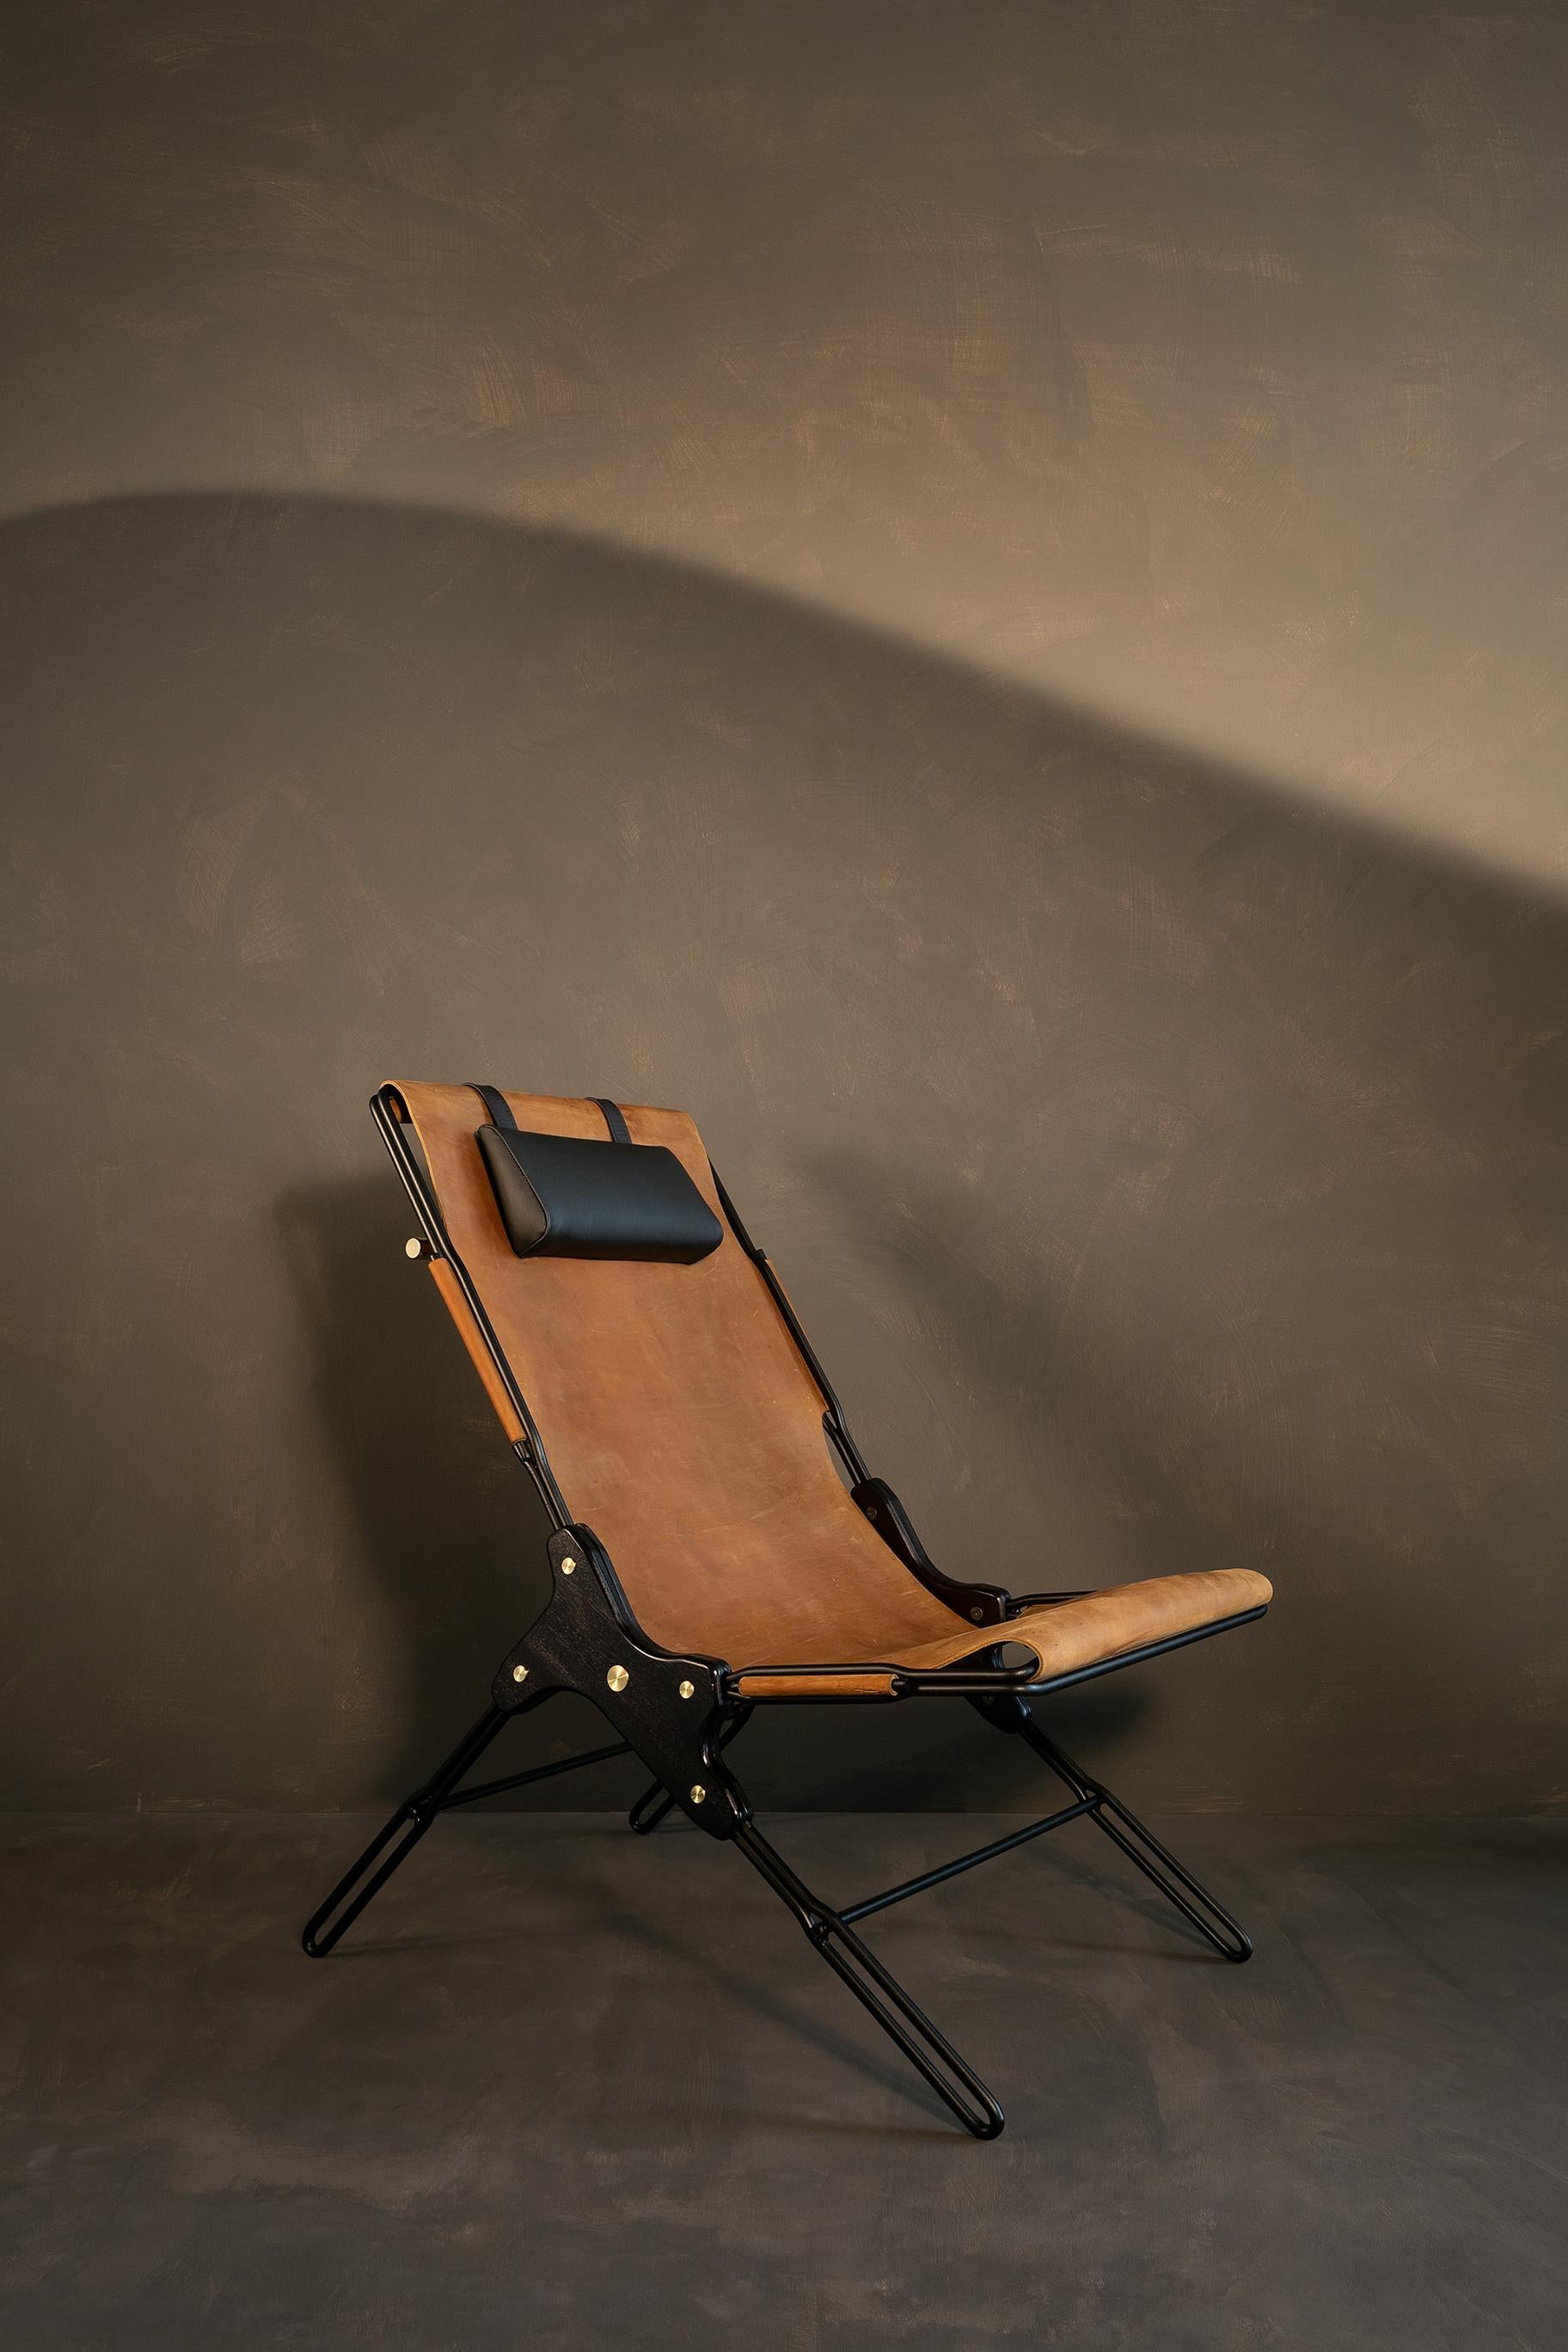 Avellana lounge chair by Estudio Andean 
Dimensions: W 56 x D 83 x H 93 cm
Materials: steel, bronze, wood, leather.

Lounge chair made of steel rod structure and solid colorado wood with a natural oil finish, Ecuadorian sustainable cowhide